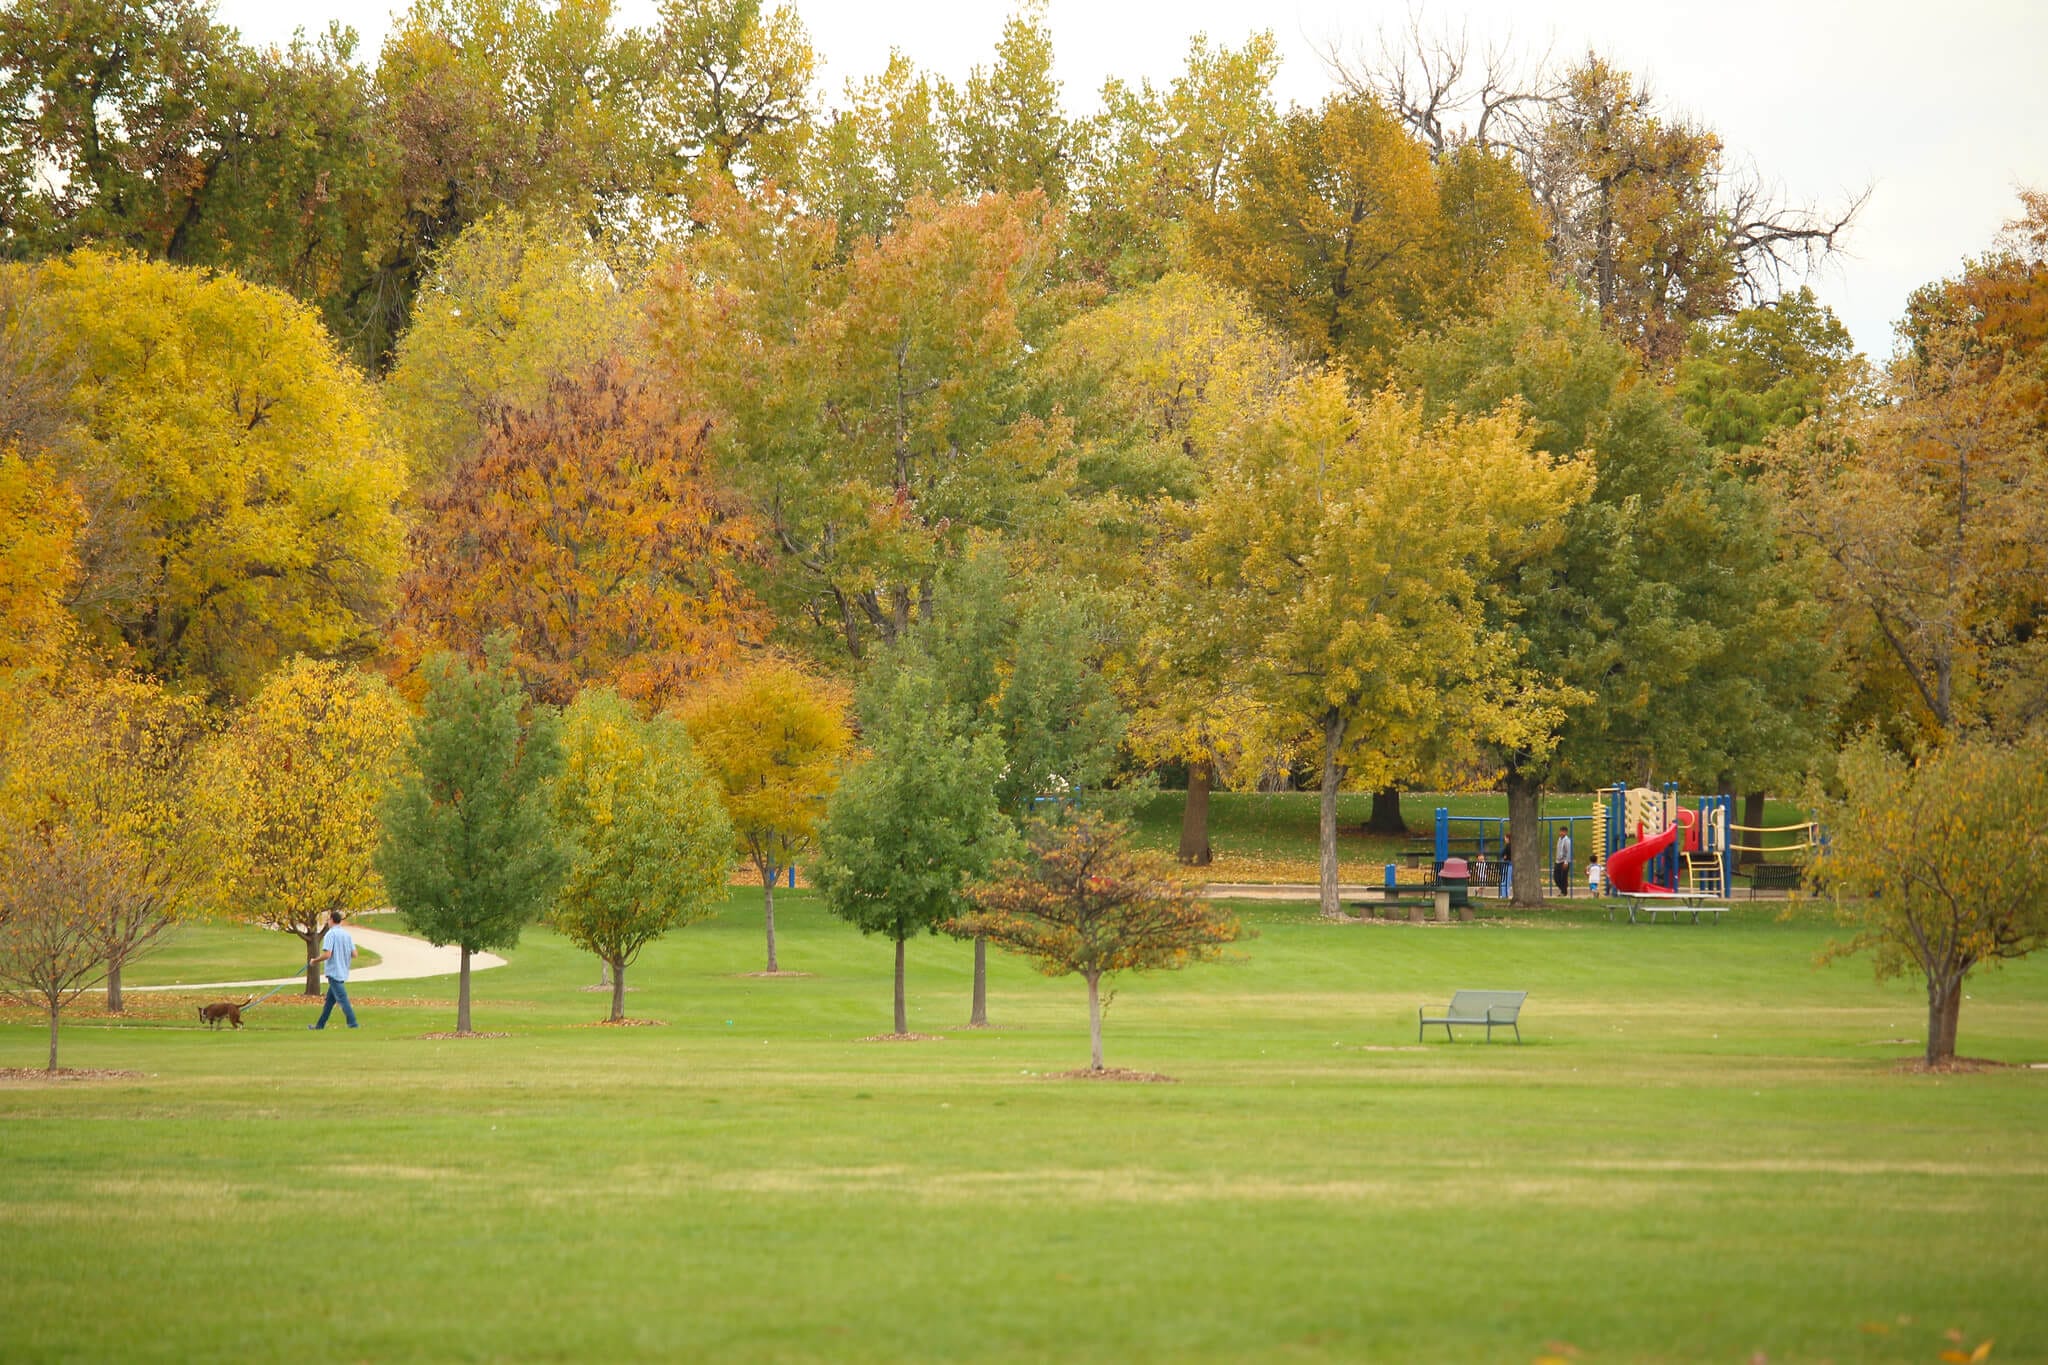 Beautiful Denver park with leaves beginning to change.